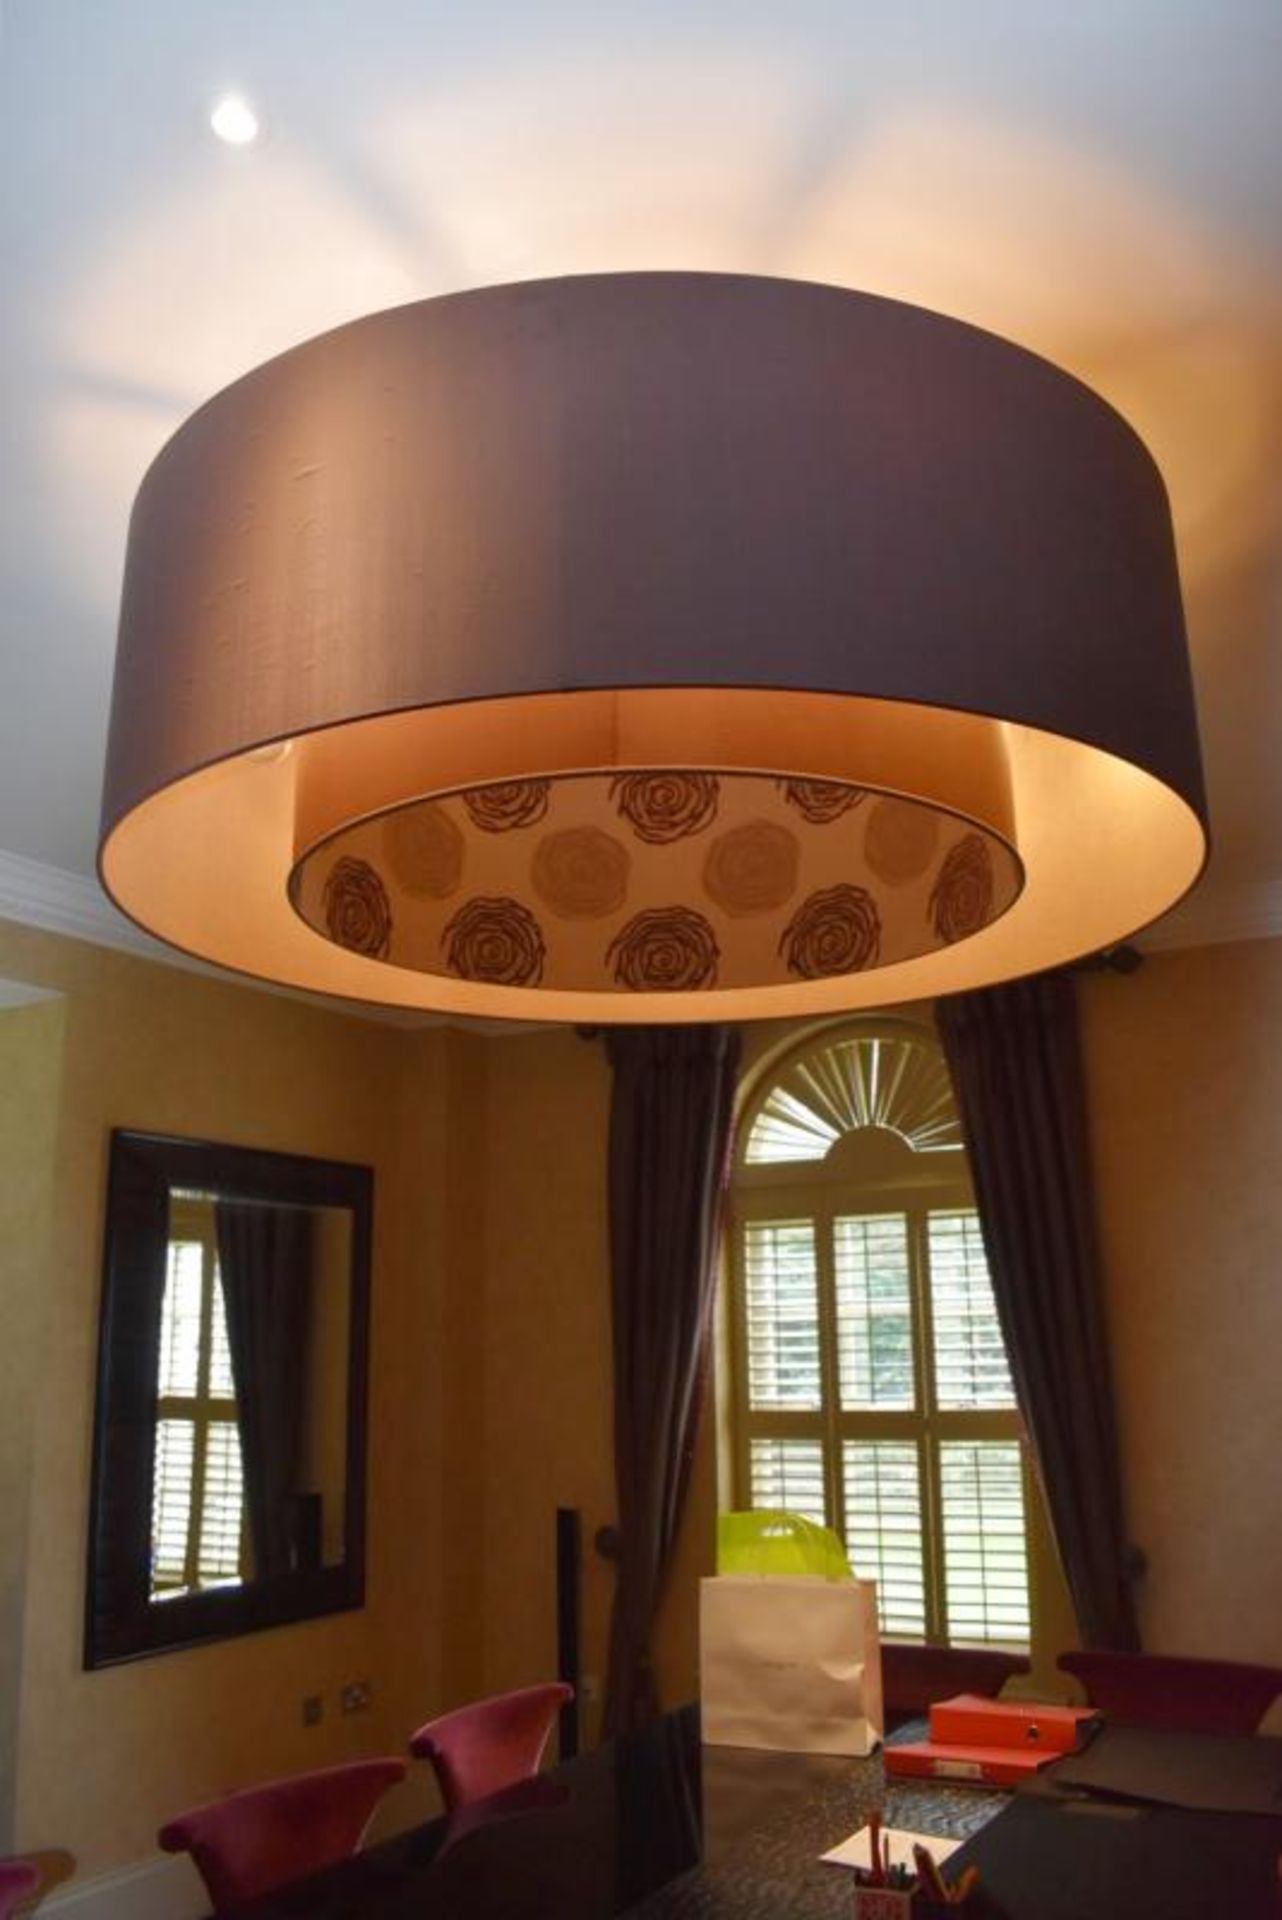 1 x Huge 1.5 Metre Light Fitting Featuring A Double Shade - Dimensions: 150cm Diamter, 50cm Height